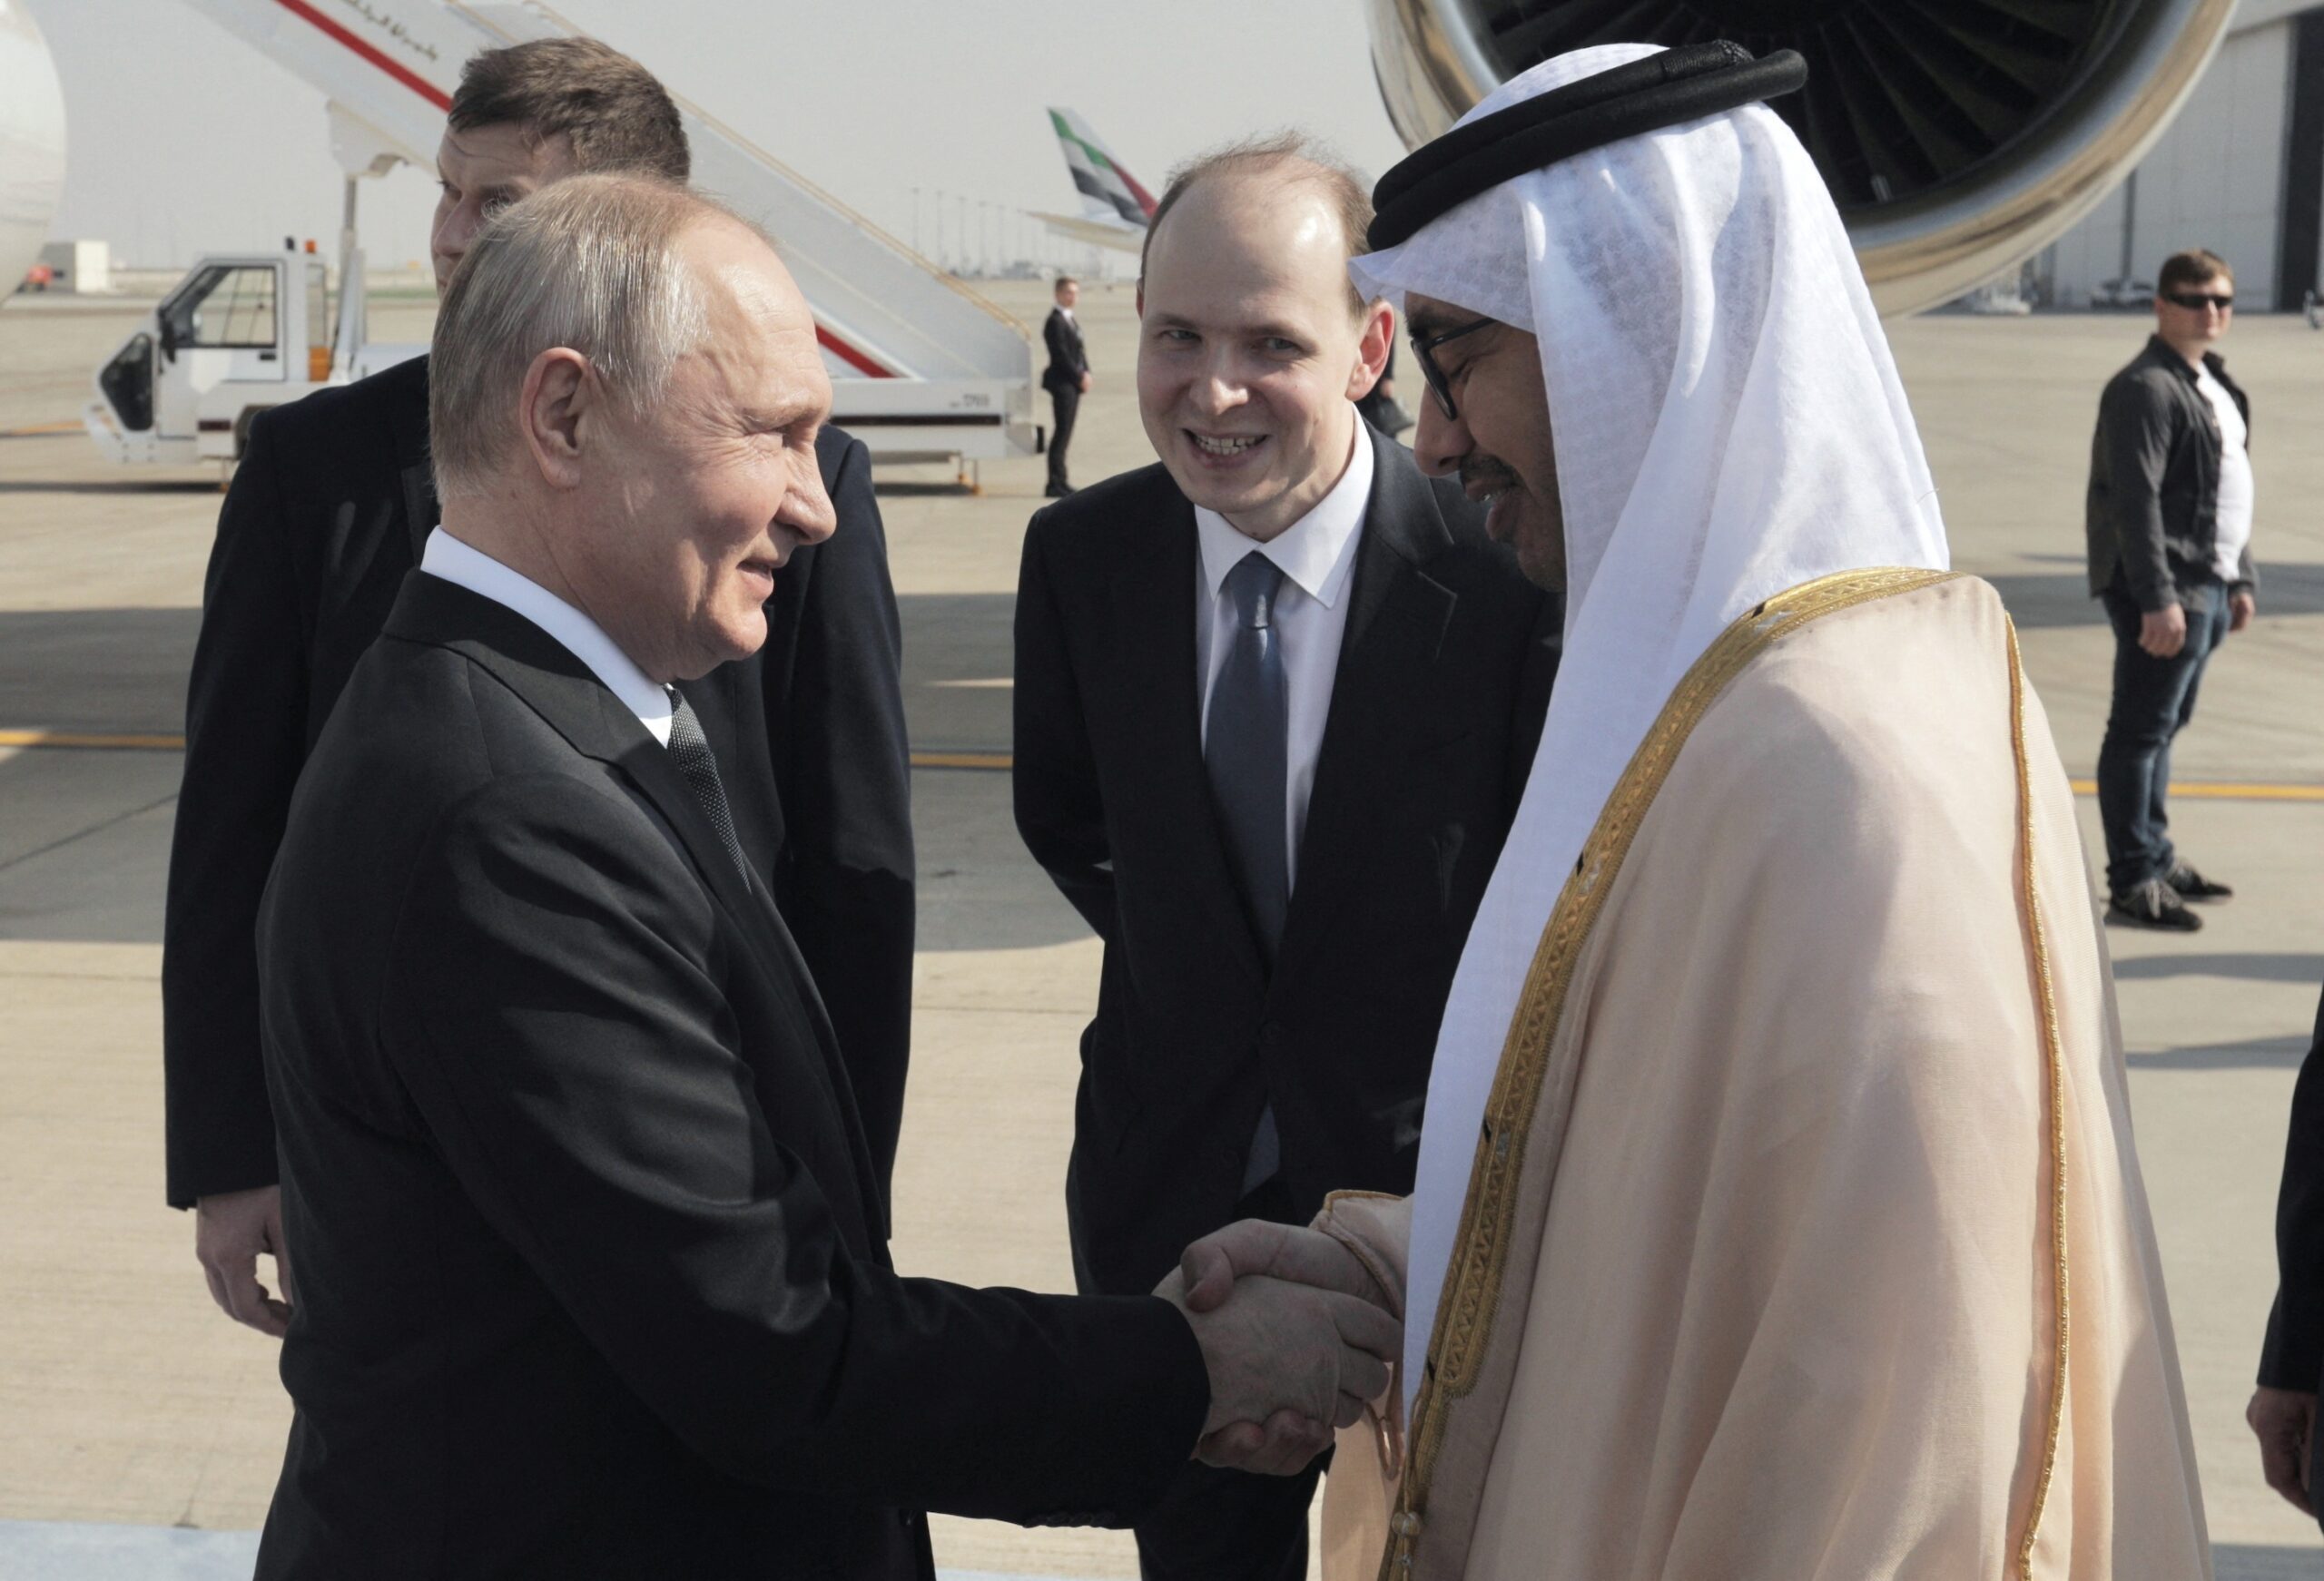 President Vladimir Putin is greeted by the UAE's foreign affairs minister, Sheikh Abdullah bin Zayed, at Abu Dhabi airport on Wednesday